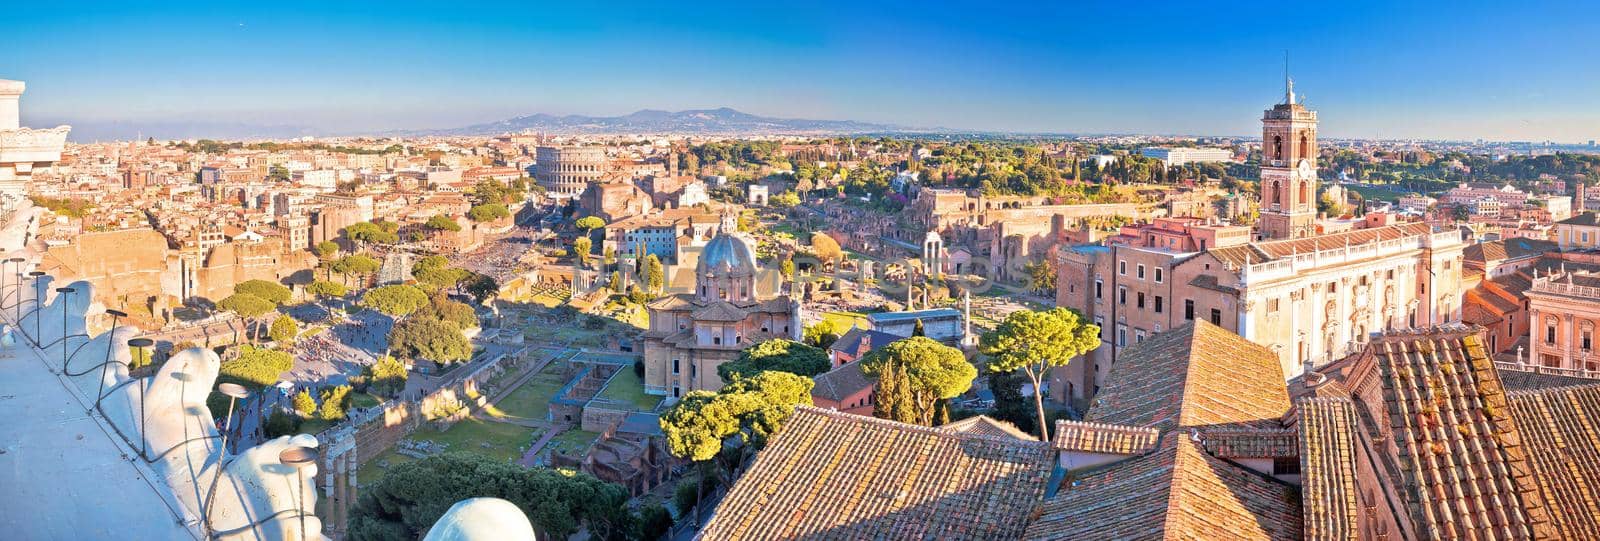 Eternal city of Rome historic landmarks panoramic view, capital of Italy
